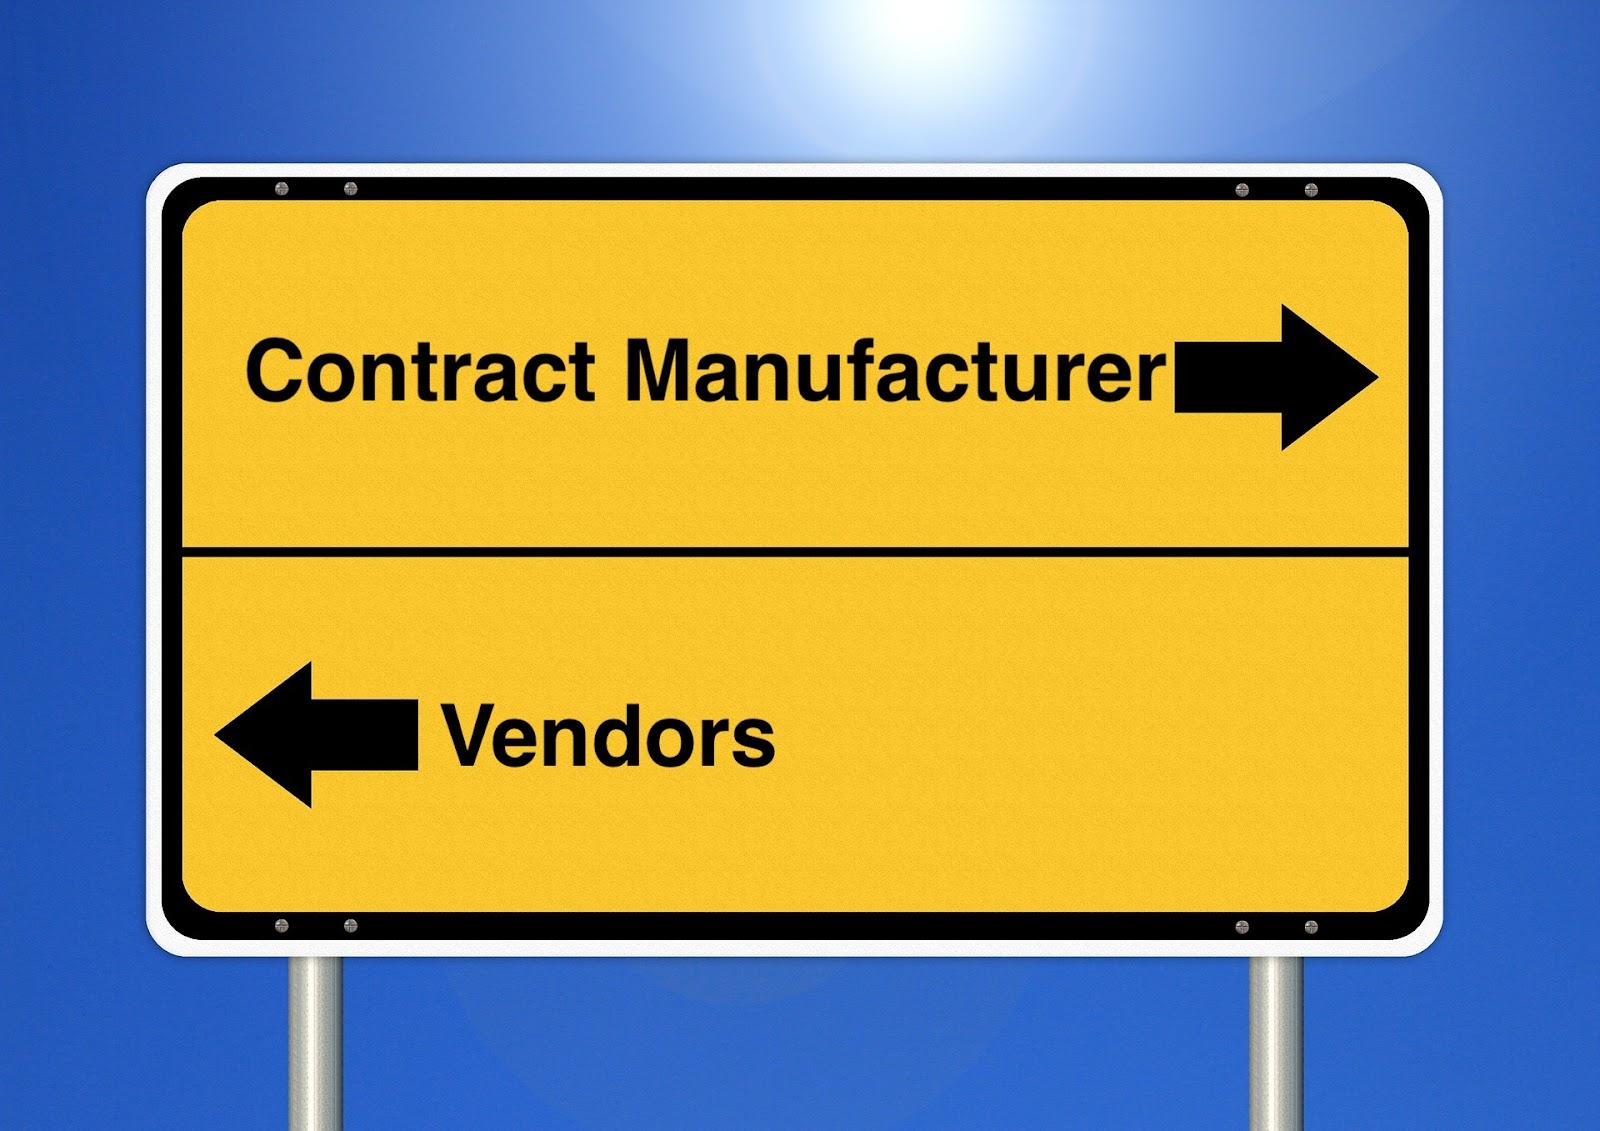 Do you need a Contract Manufacturer or a Vendor?